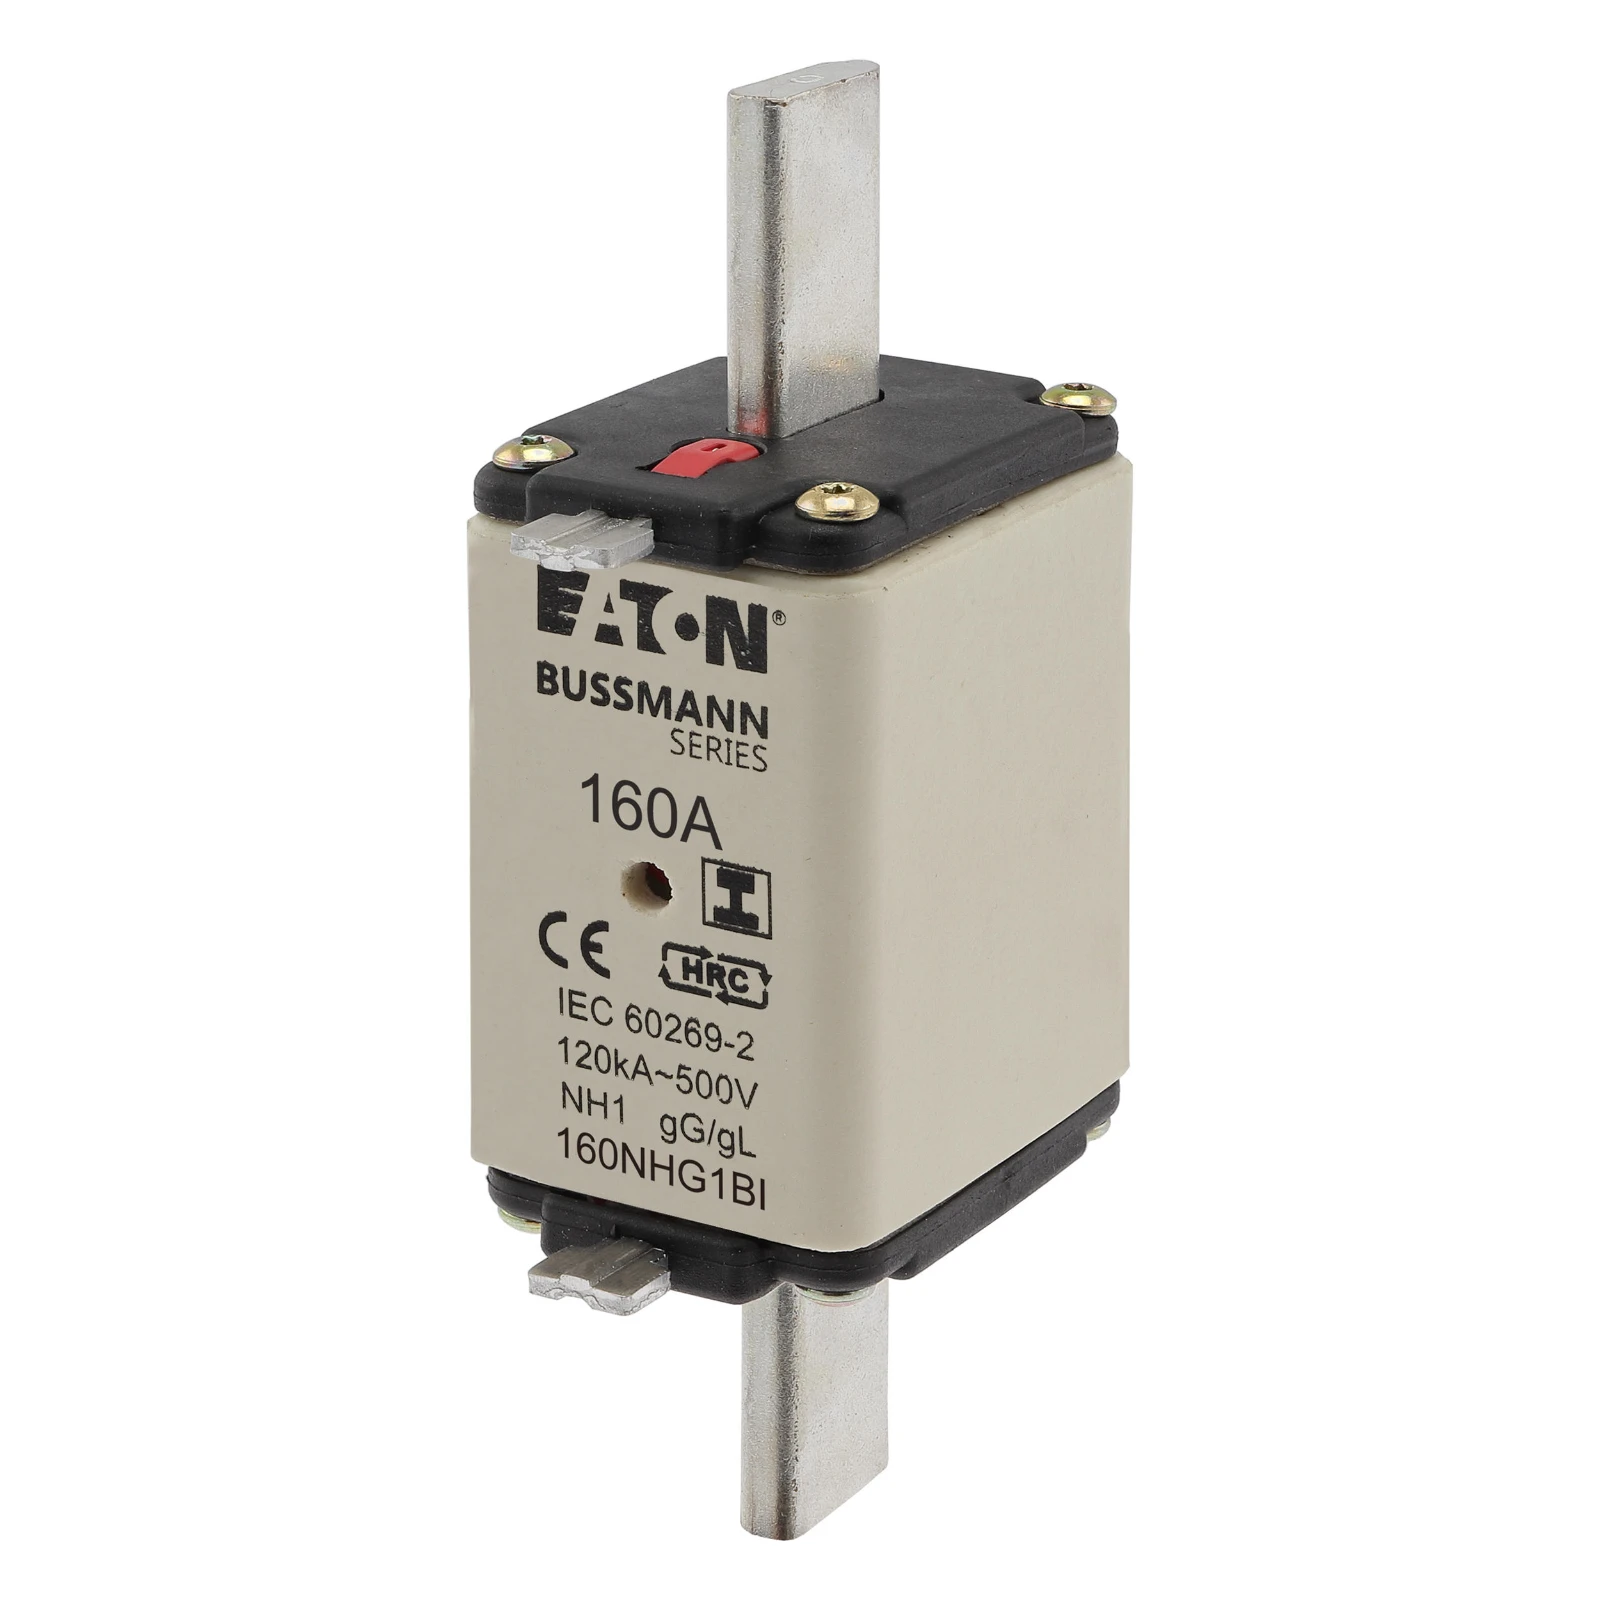 1511106 - Eaton NH FUSE 160AMP 500V AC gG 1 DUAL IN